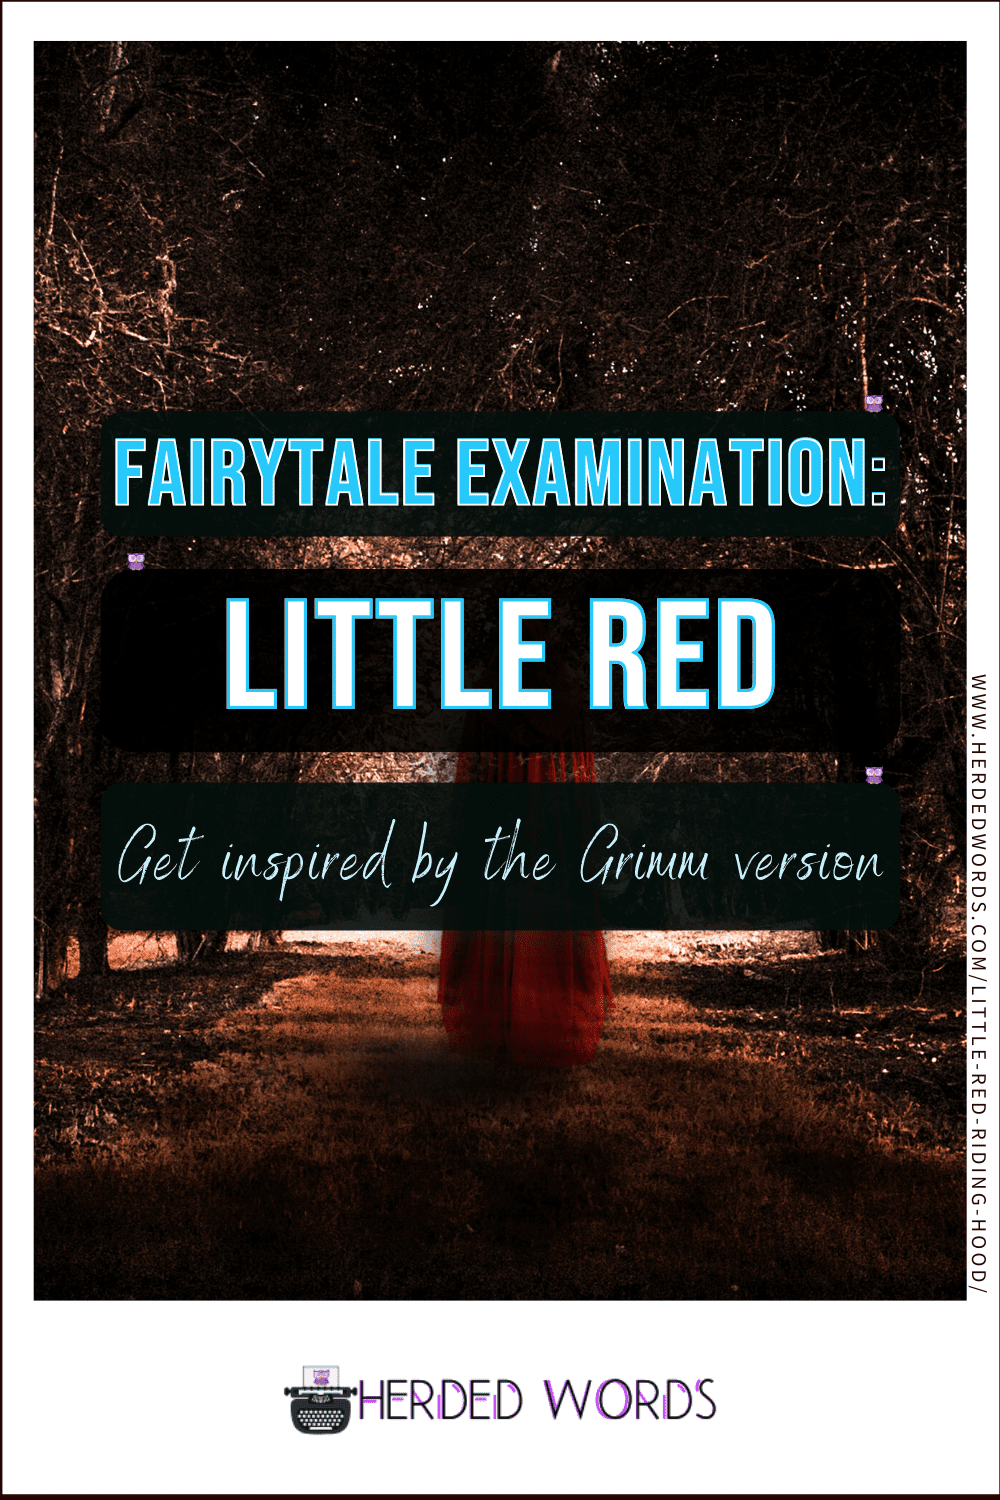 Image Link to Fairytale Examination of LITTLE RED (get inspired by the Grimm version)